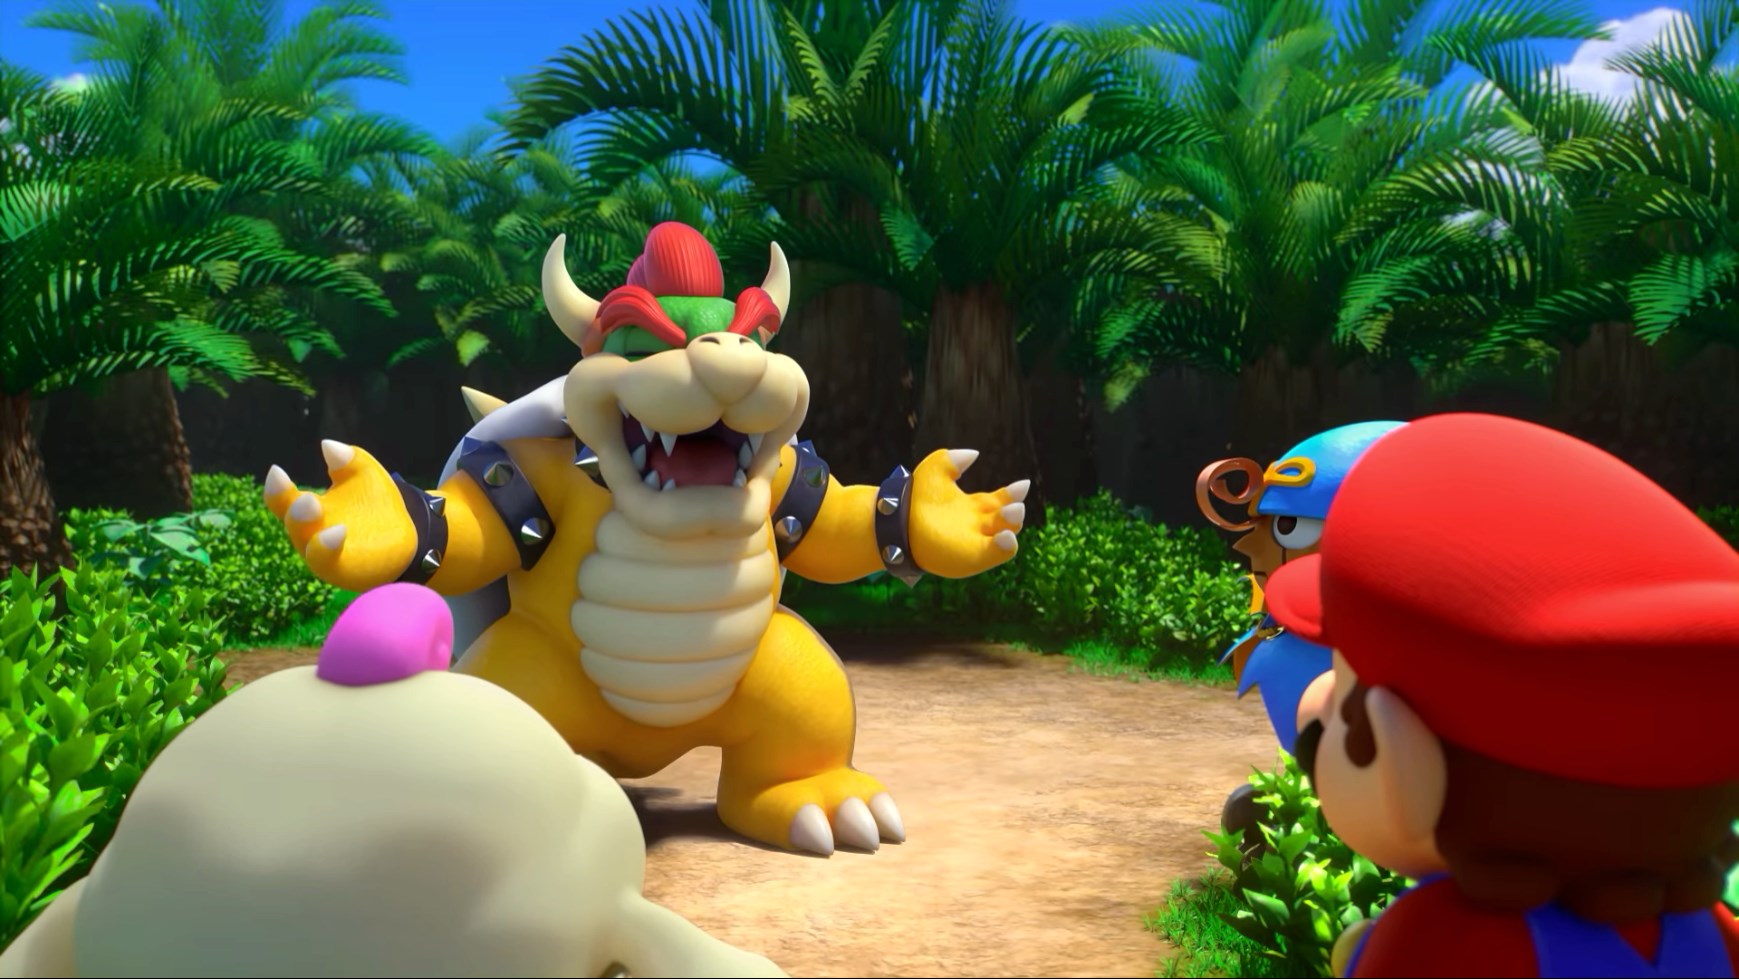 Bowser talks to Mallow, Geno, and Mario in Super Mario RPG.